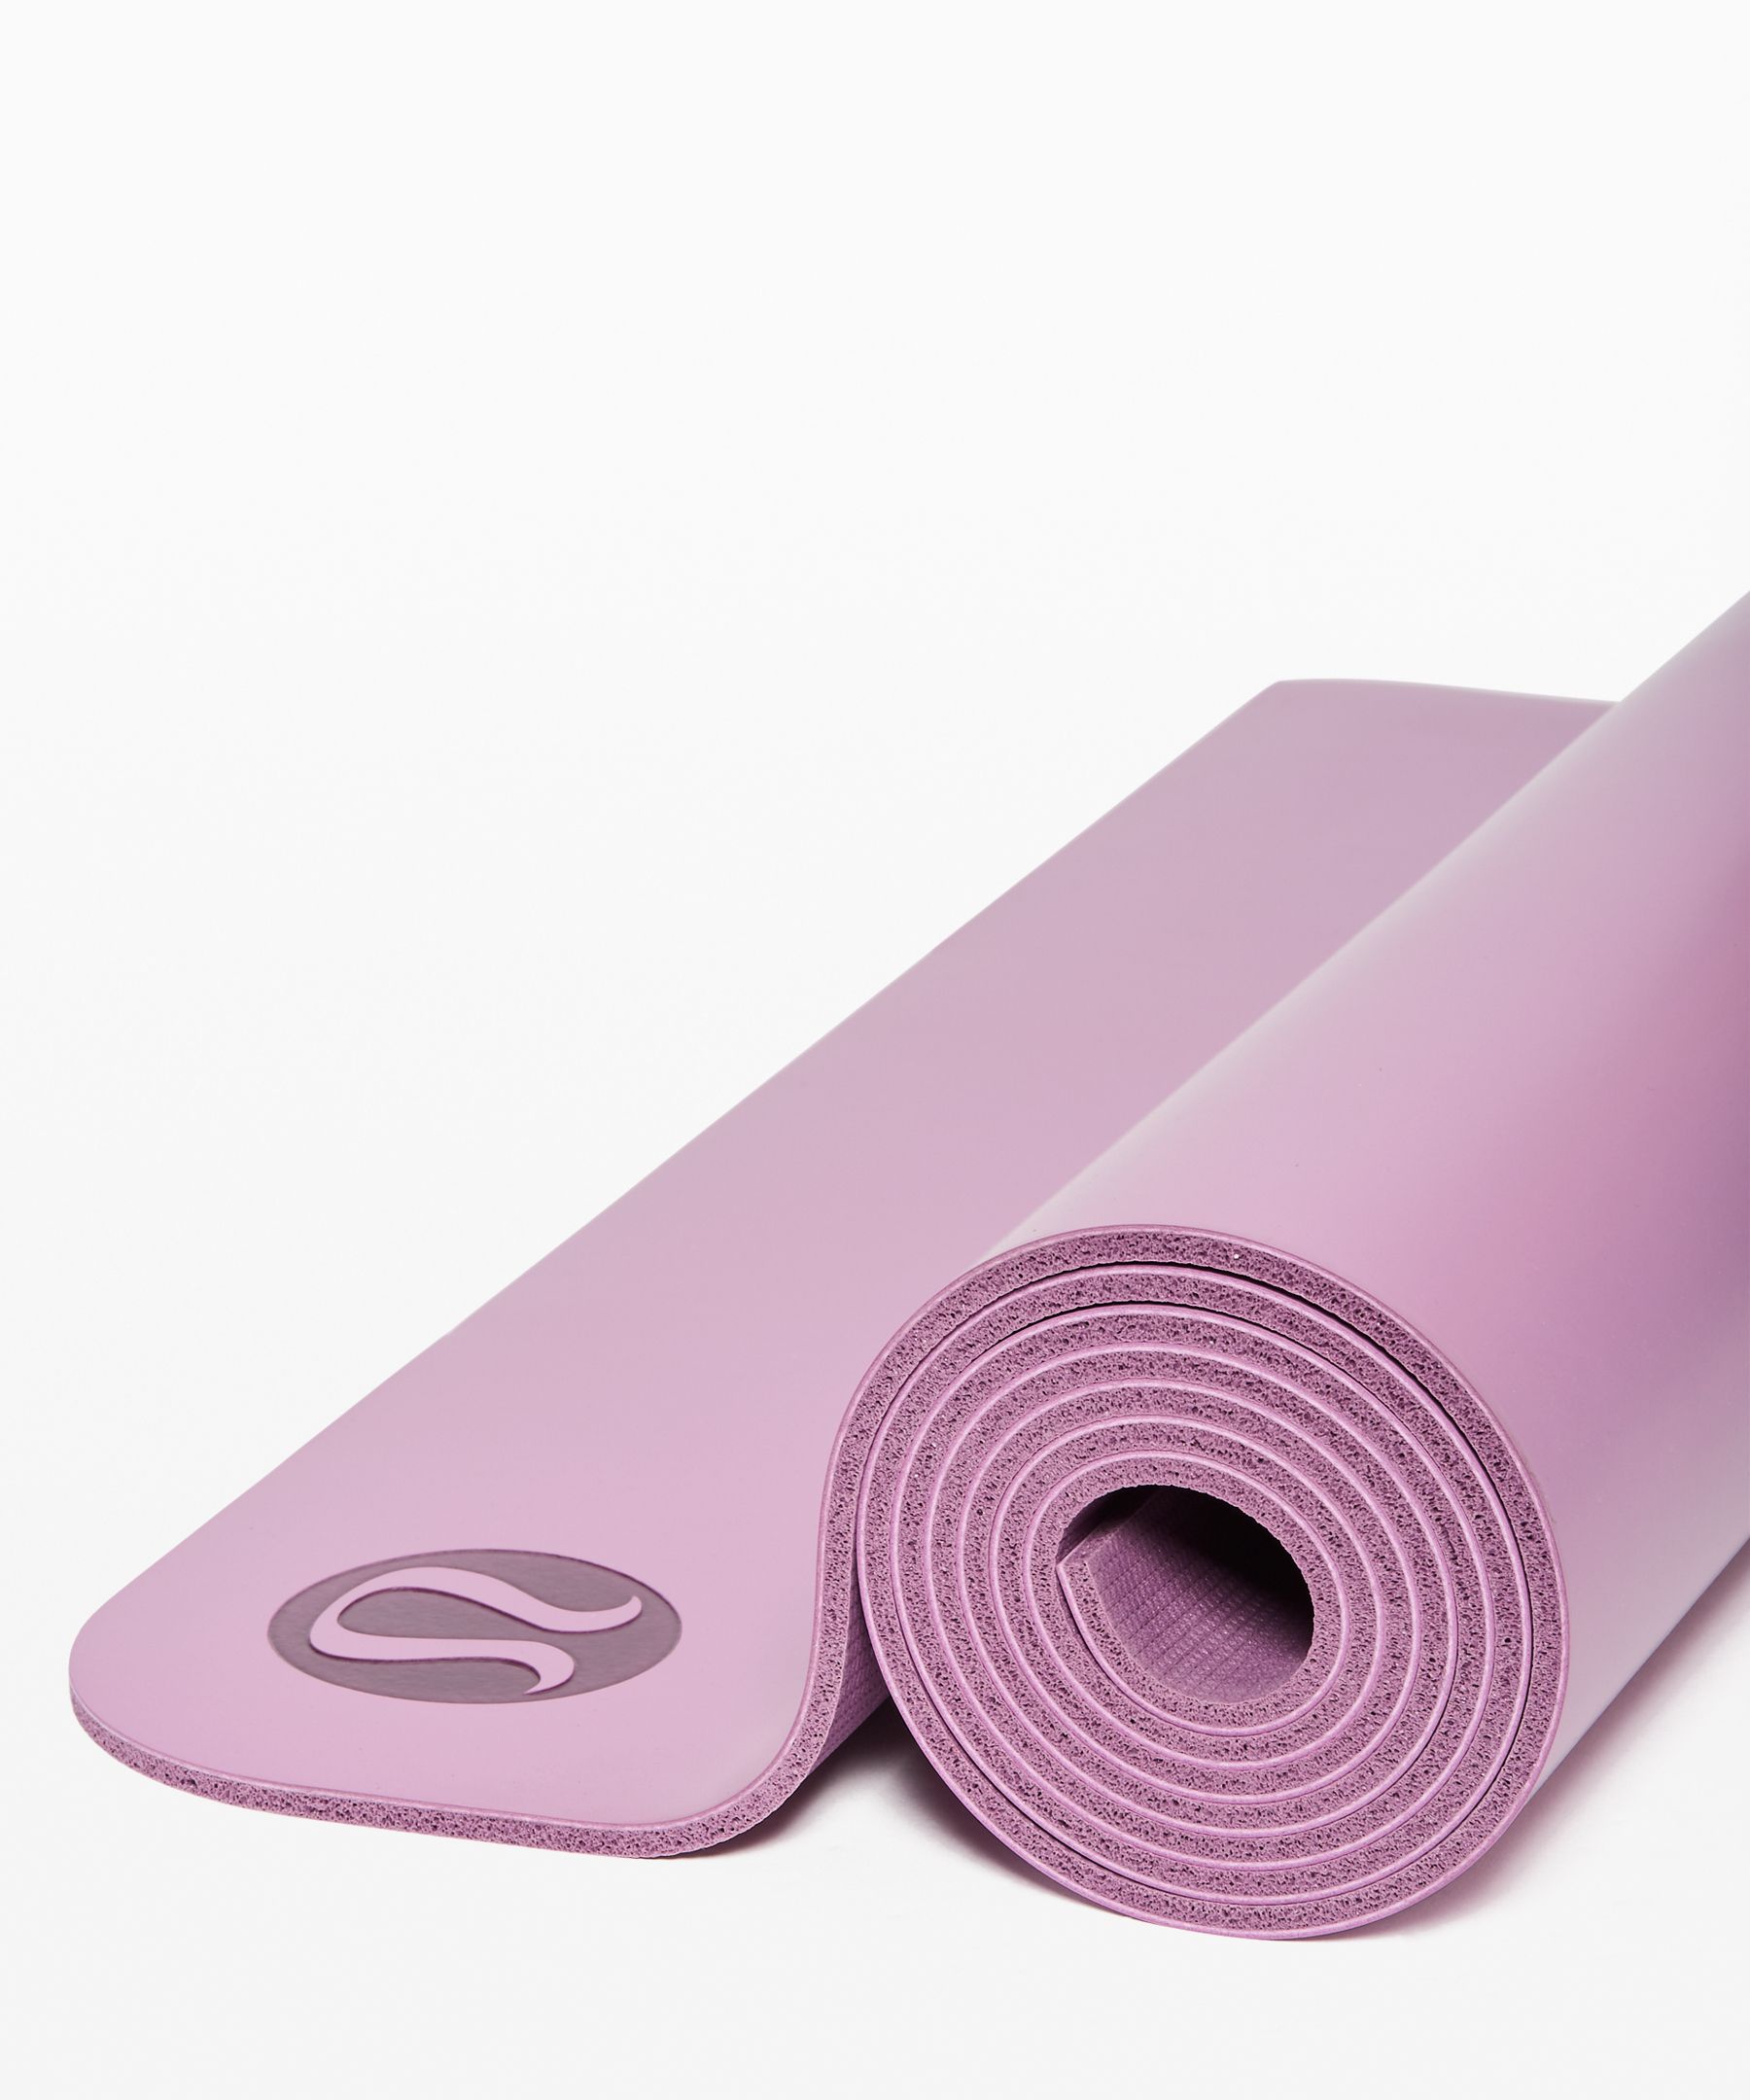 Nature Rubber Premium Yoga Mat - 5mm Thick Non Slip Anti-Tear Fitness Mat  for Hot Yoga, Pilates & Stretching Home Gym Workout